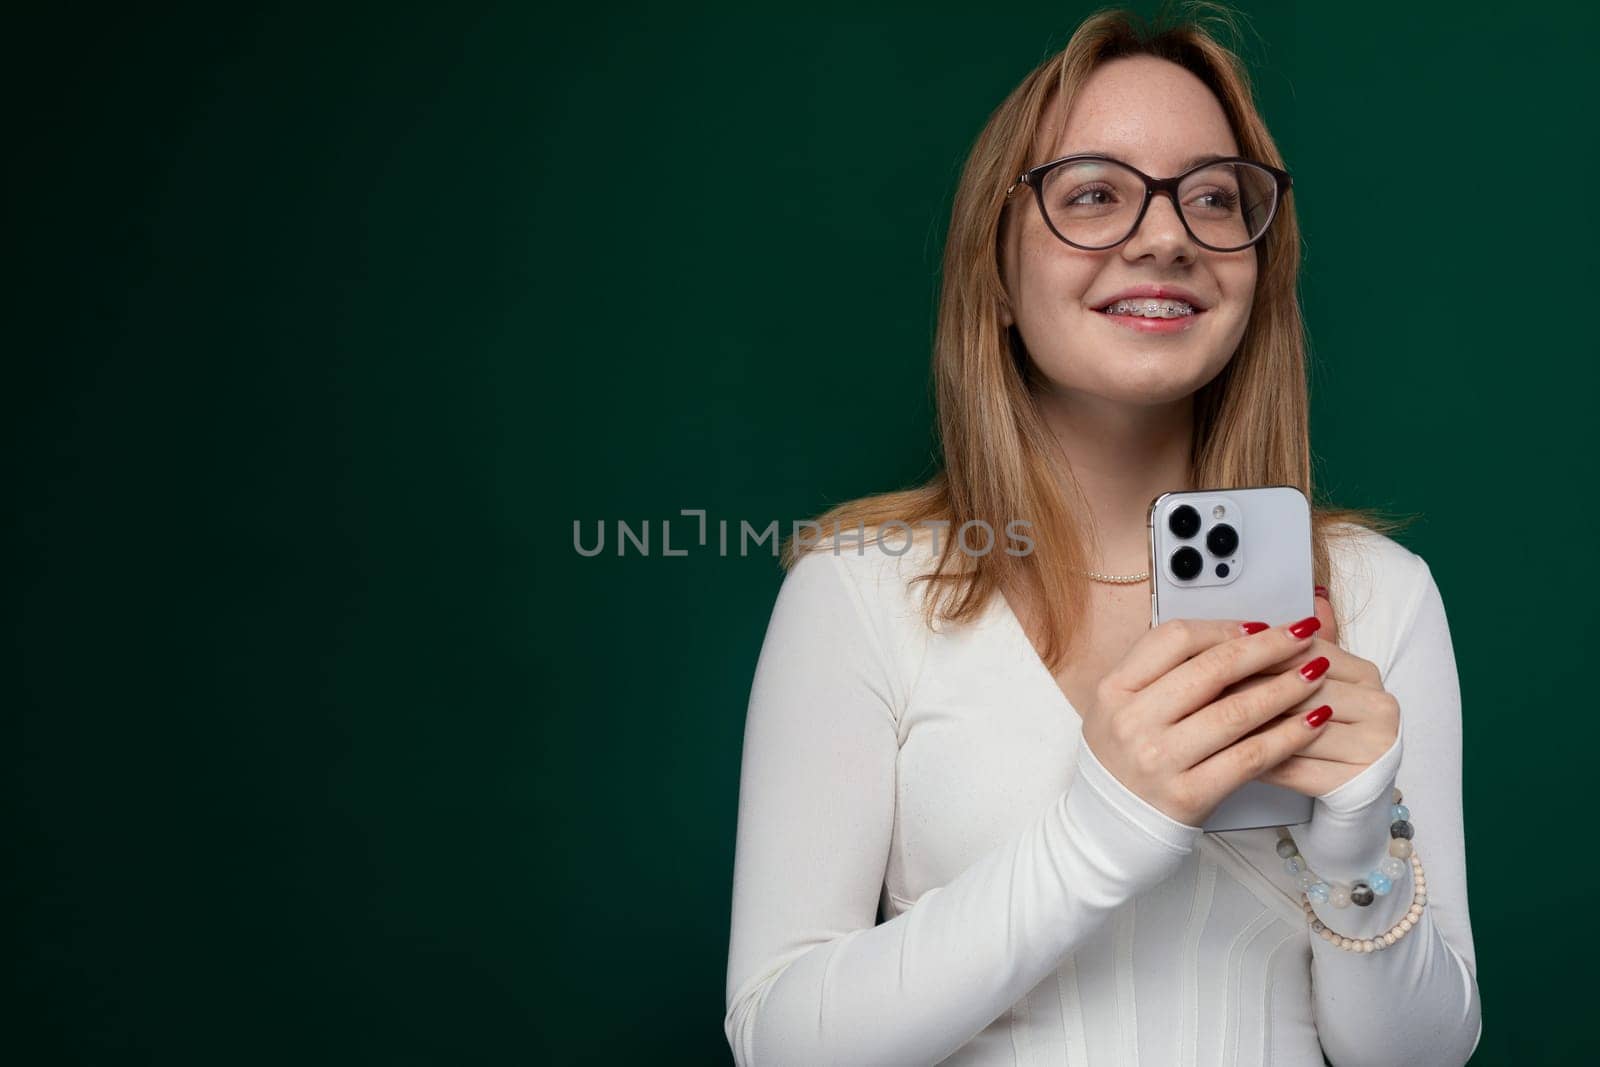 A woman wearing glasses is seen holding a cell phone in her hand. She appears to be looking at the screen intently, possibly texting or browsing. The background is blurred, placing the focus on the woman and her phone.